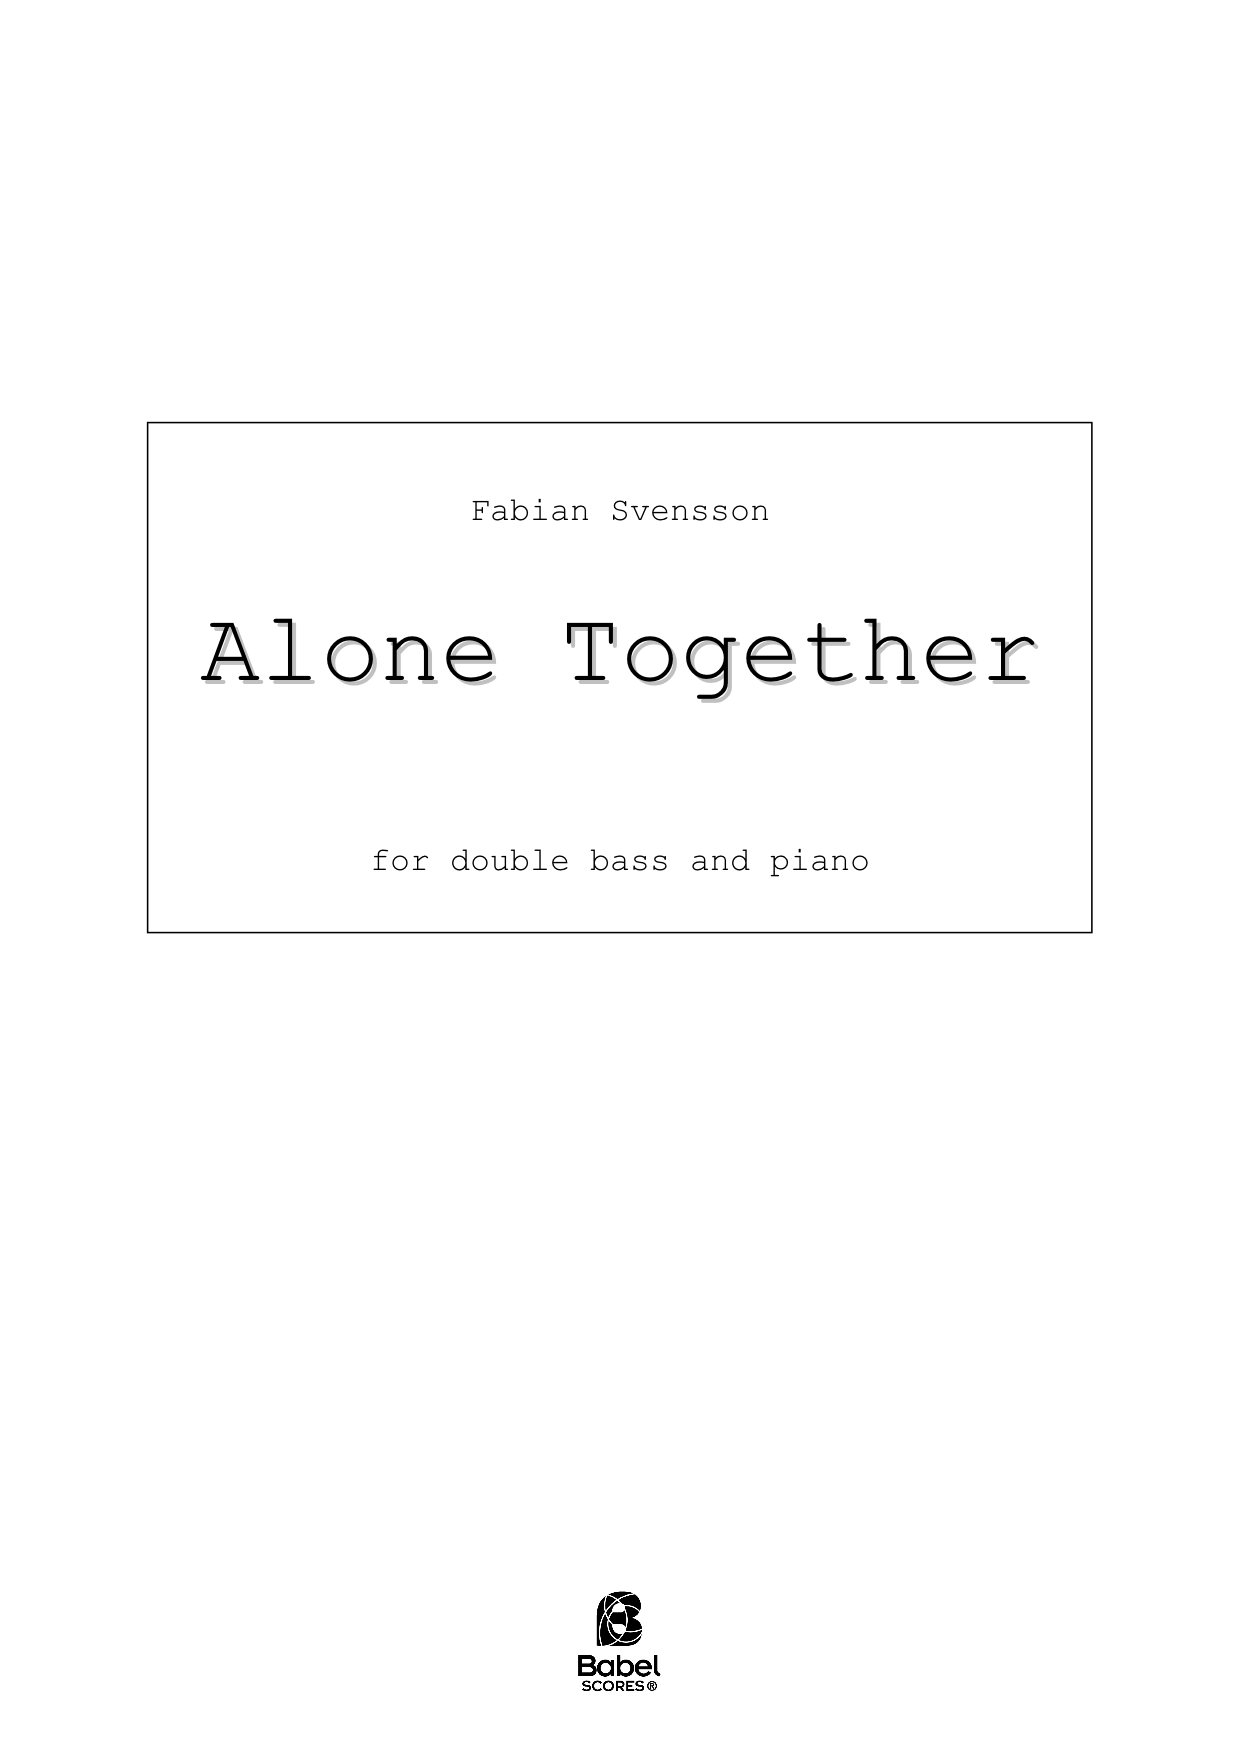 Alone Together A4 z 2 1 01